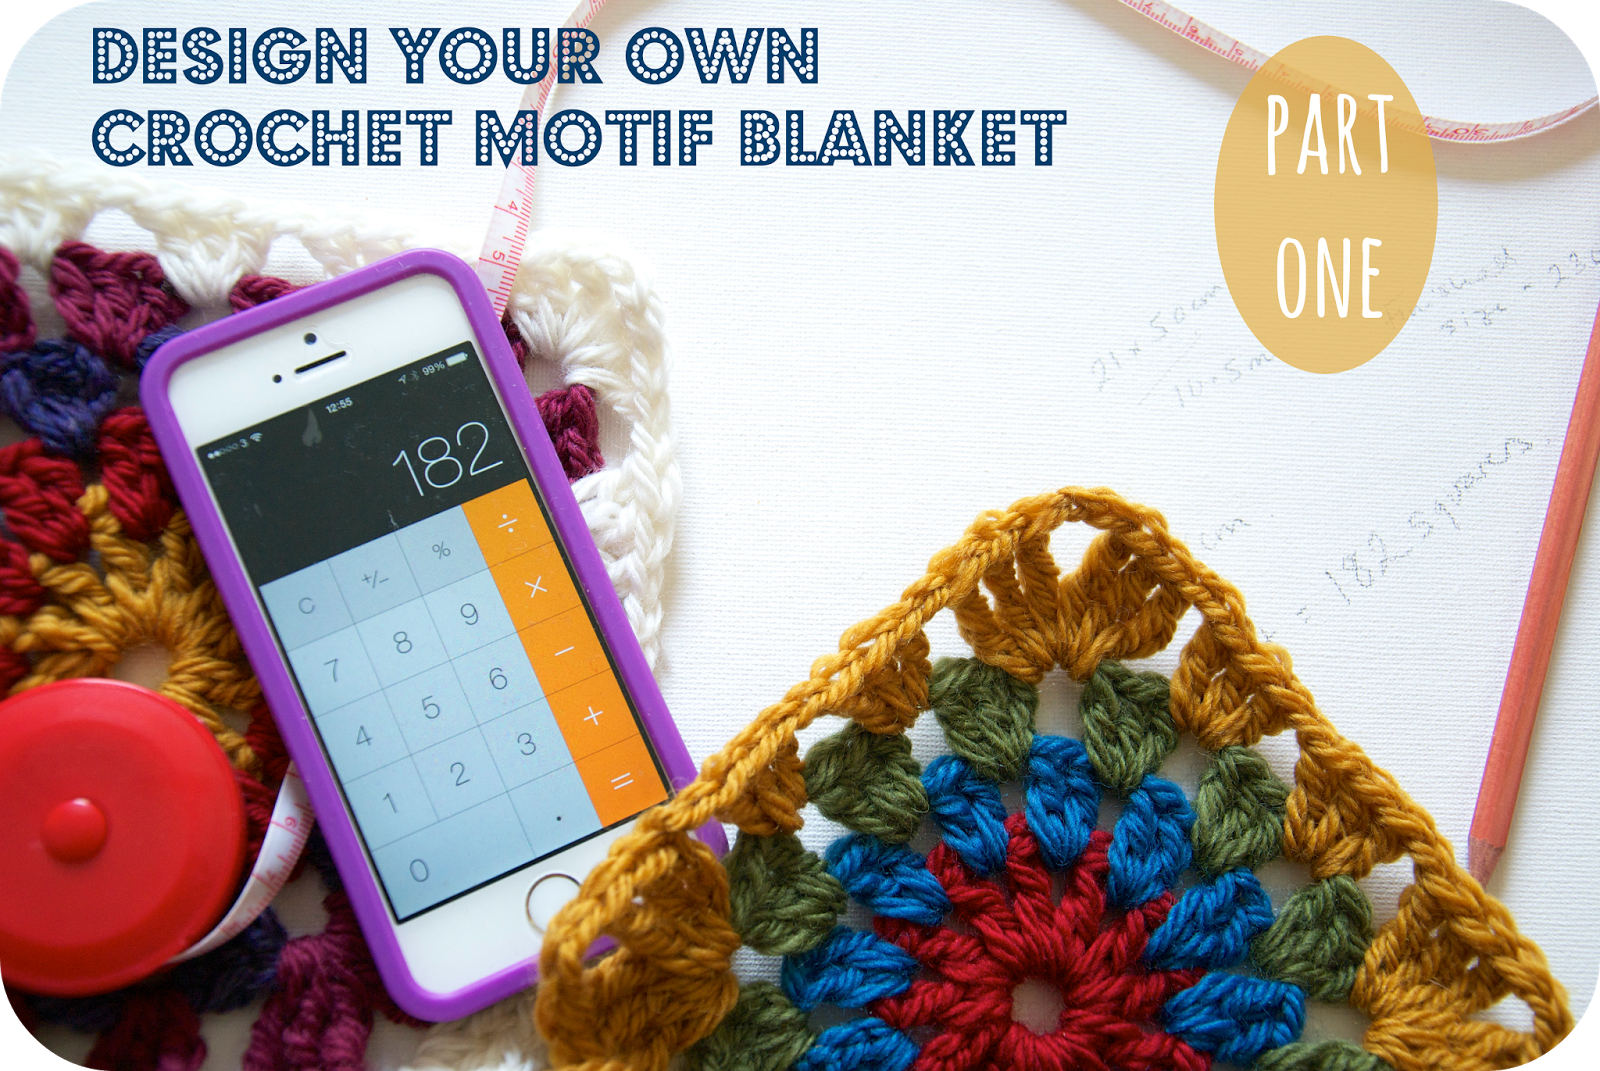 A series of blog posts, which walk you through designing your own crochet motif blanket step by step.